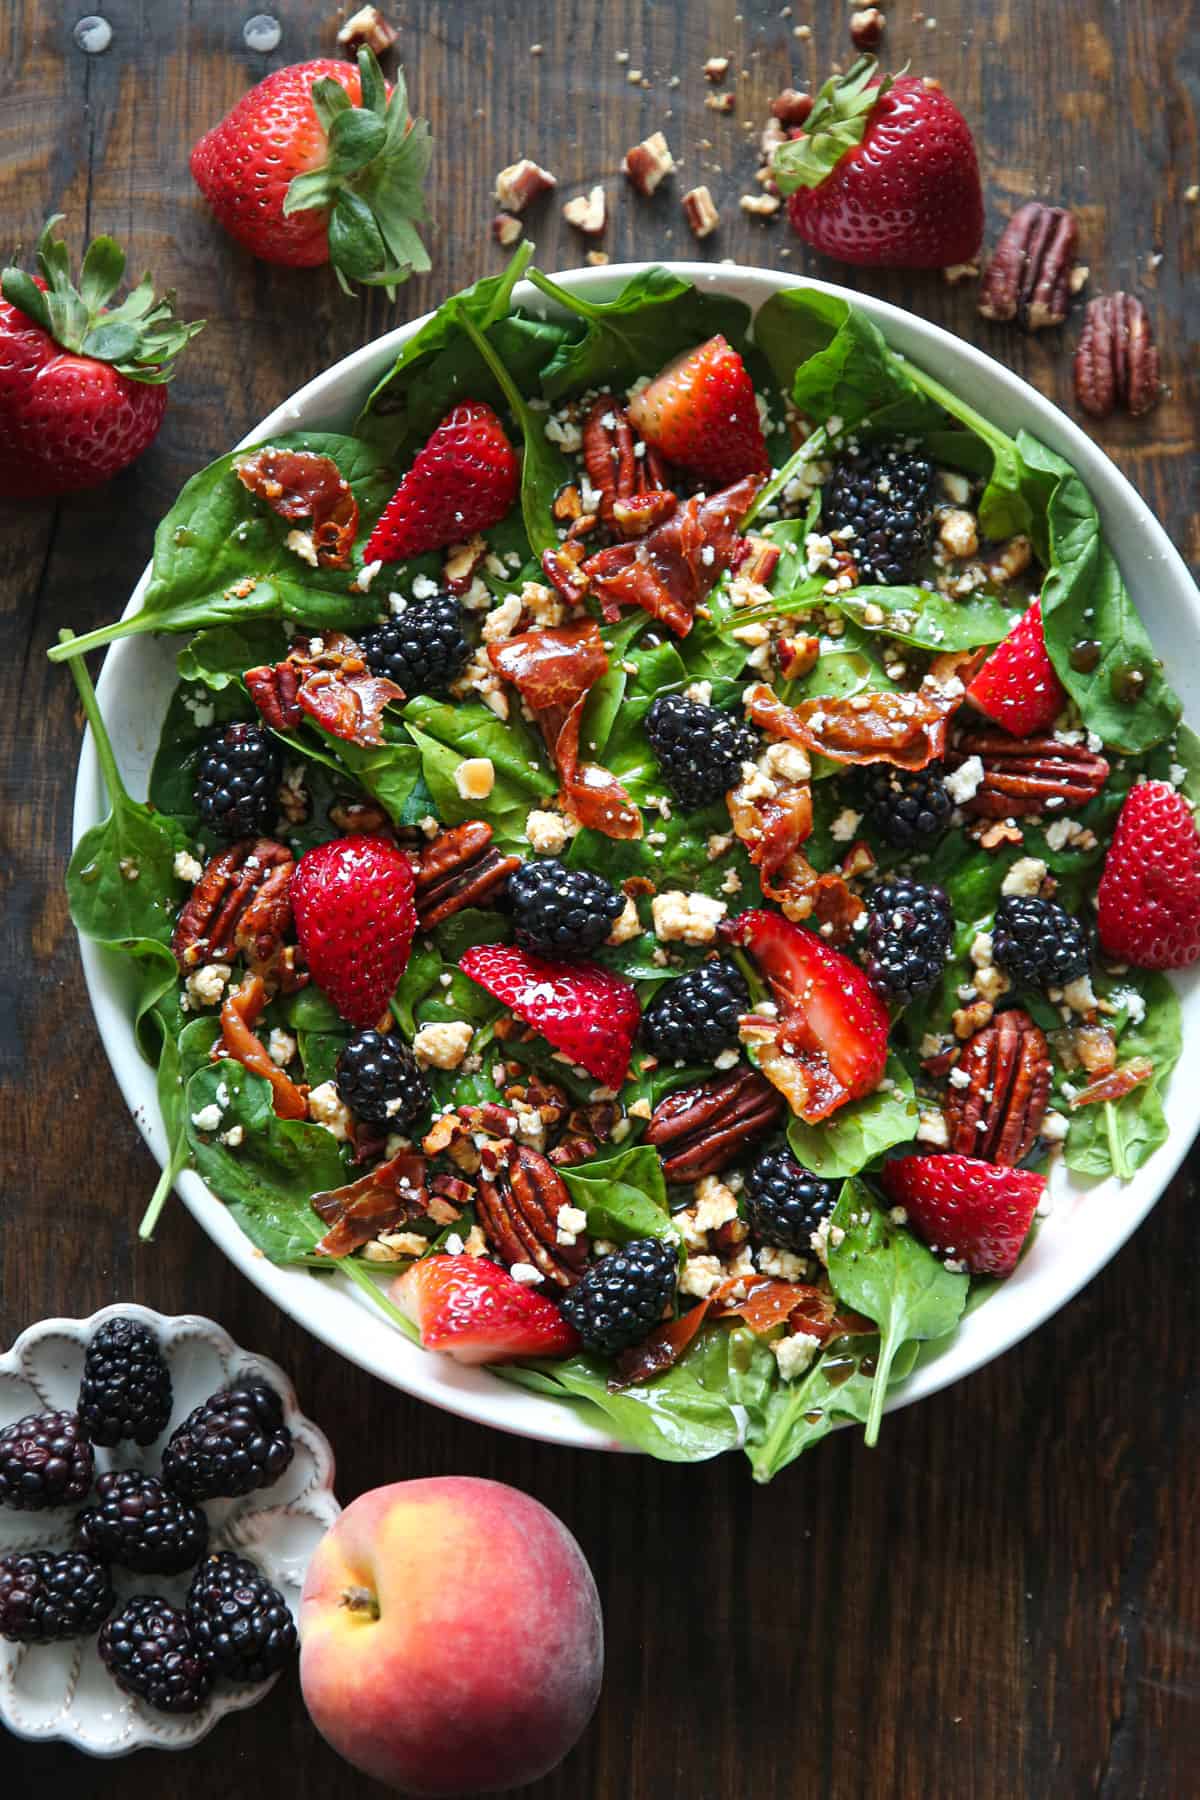 Berry spinach salad with strawberries, blackberries, feta cheese, pecans, crispy prosciutto, and balsamic glaze - in a white bowl.